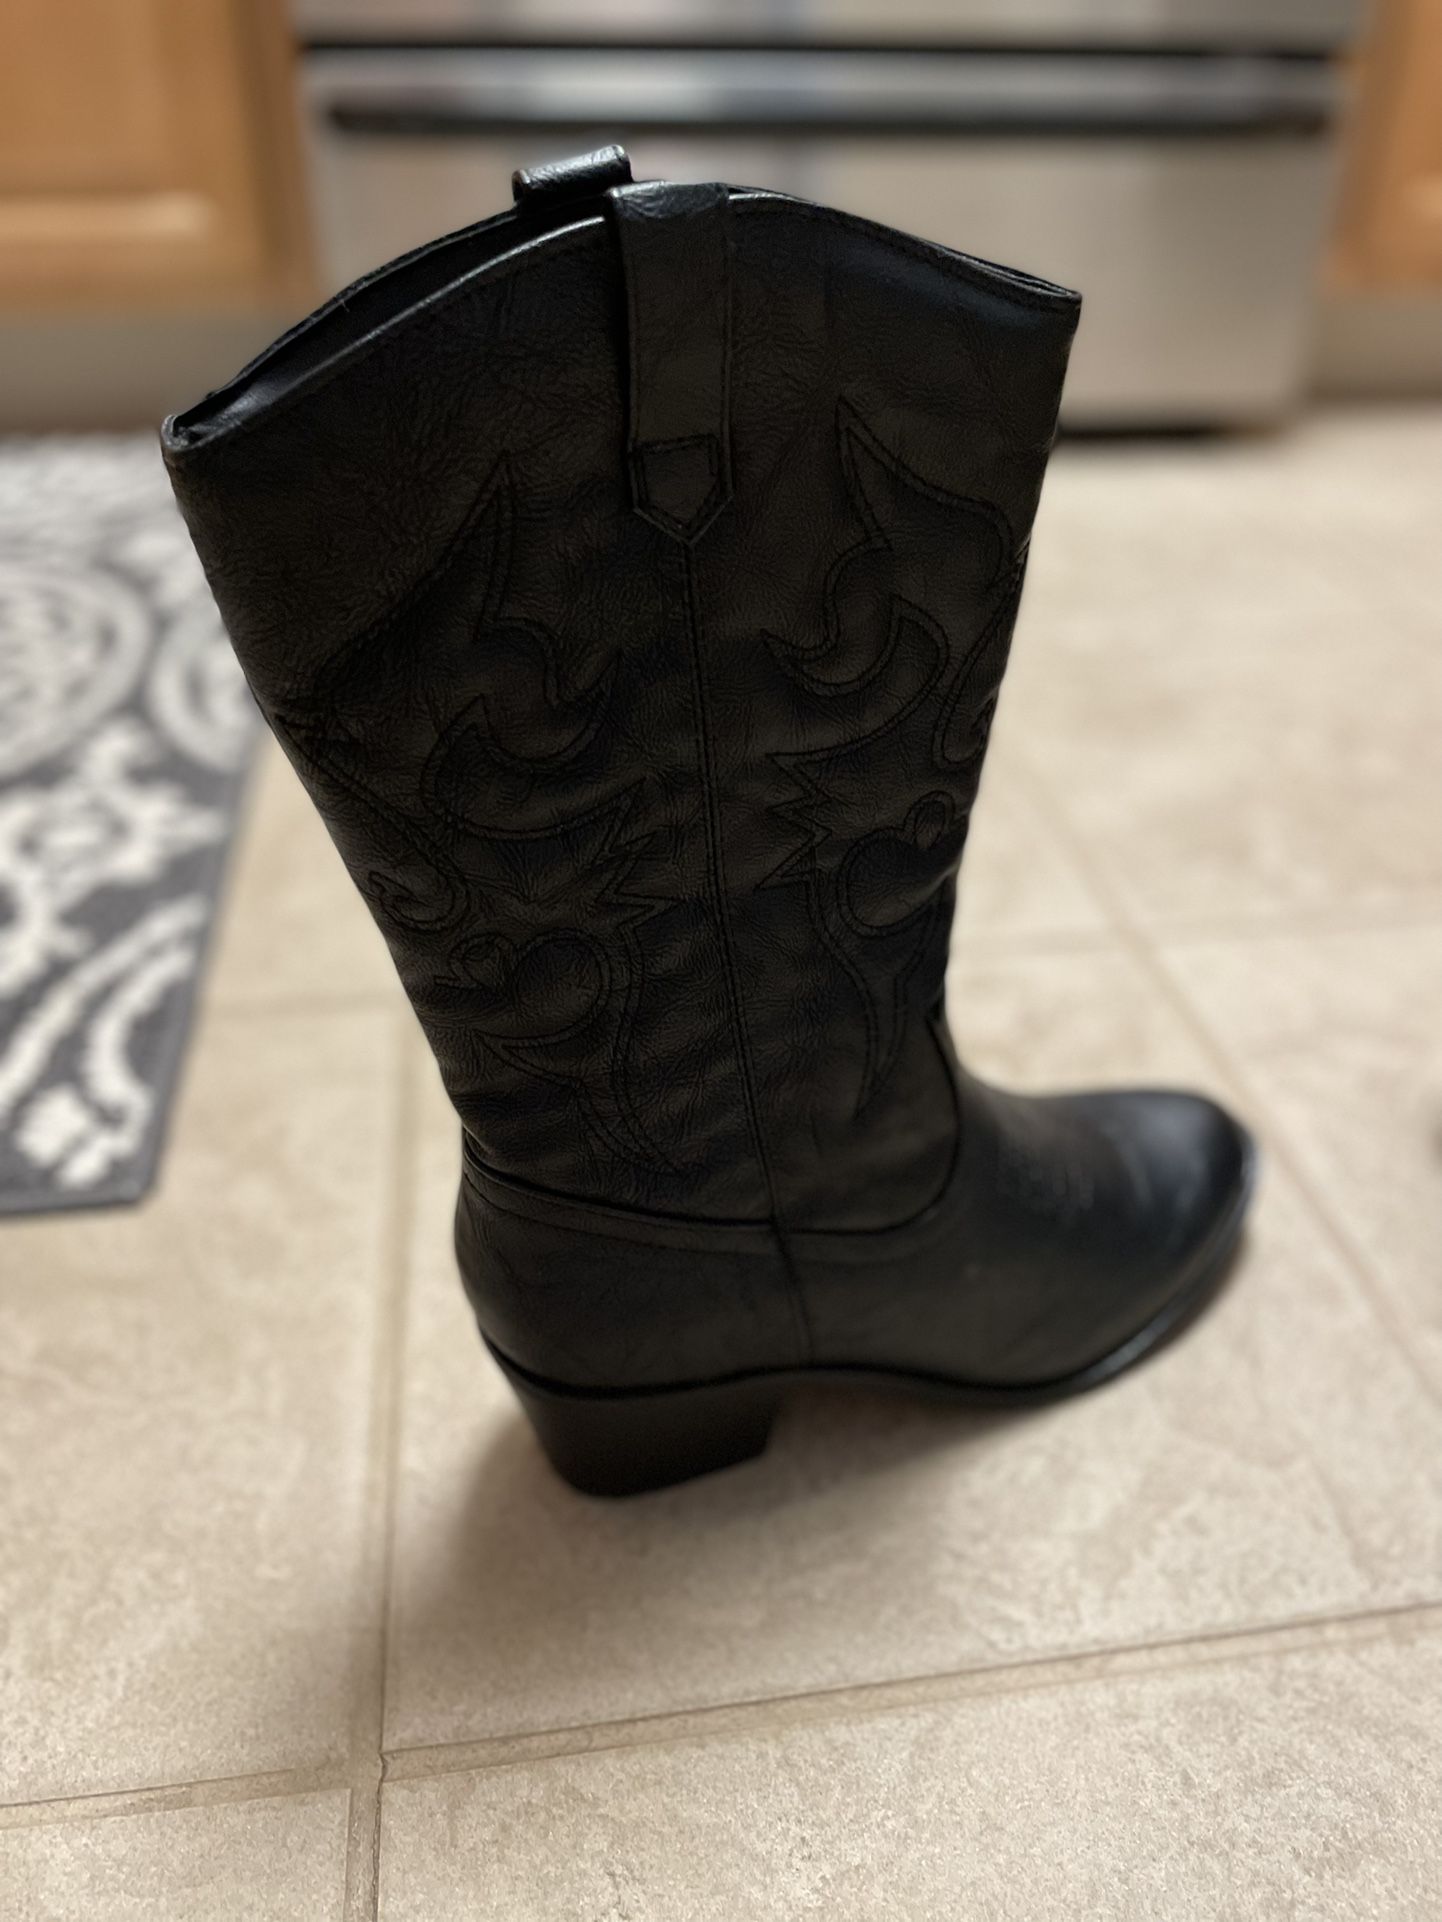 Brand New Size 8 Women’s Cowboy Boots